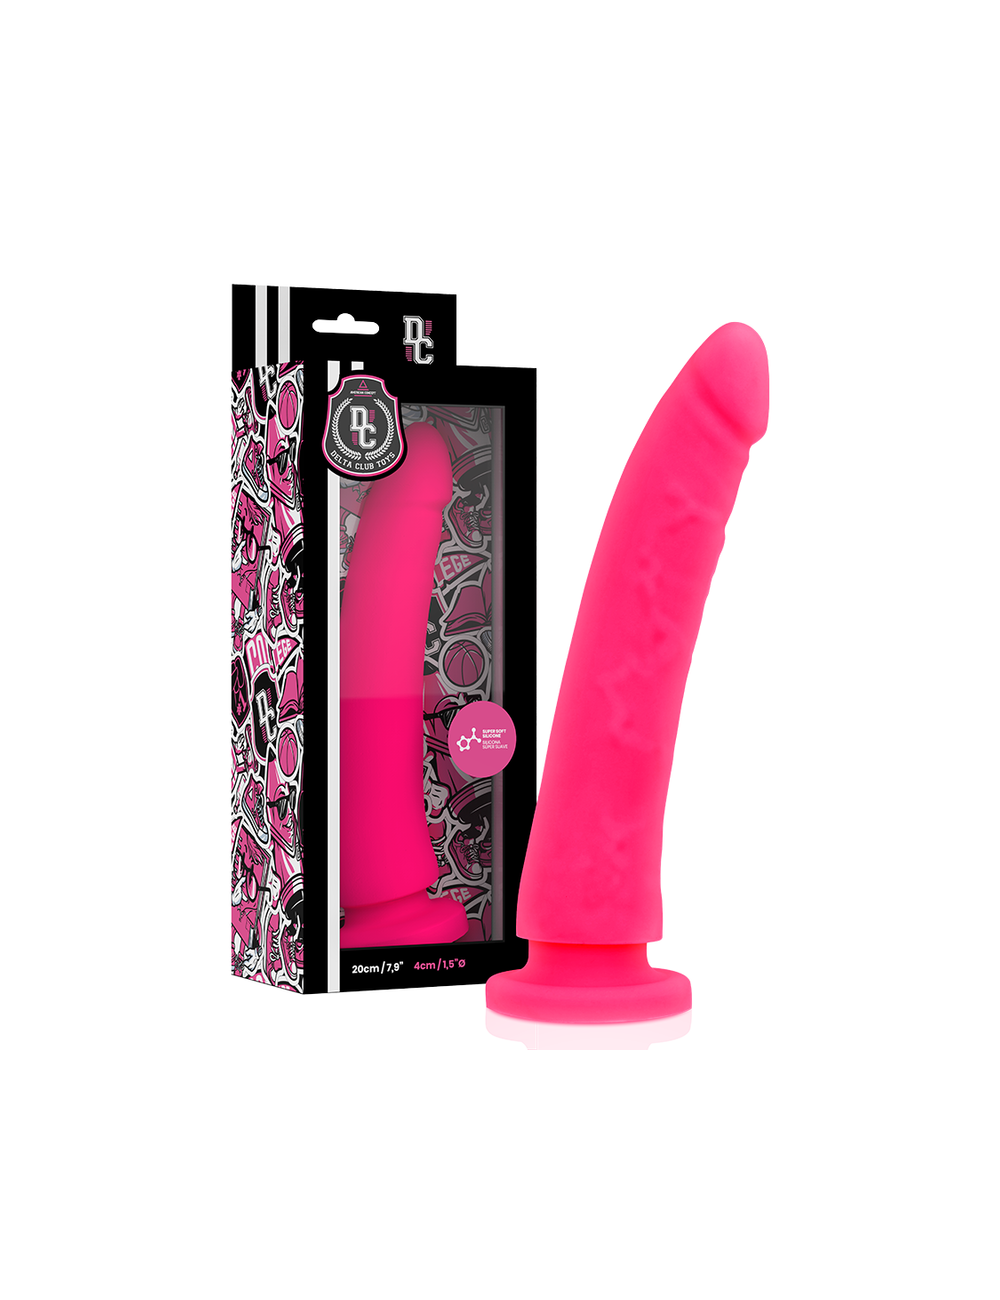 DELTA CLUB TOYS HARNESS + DONG PINK SILICONE 20 X 4 CM